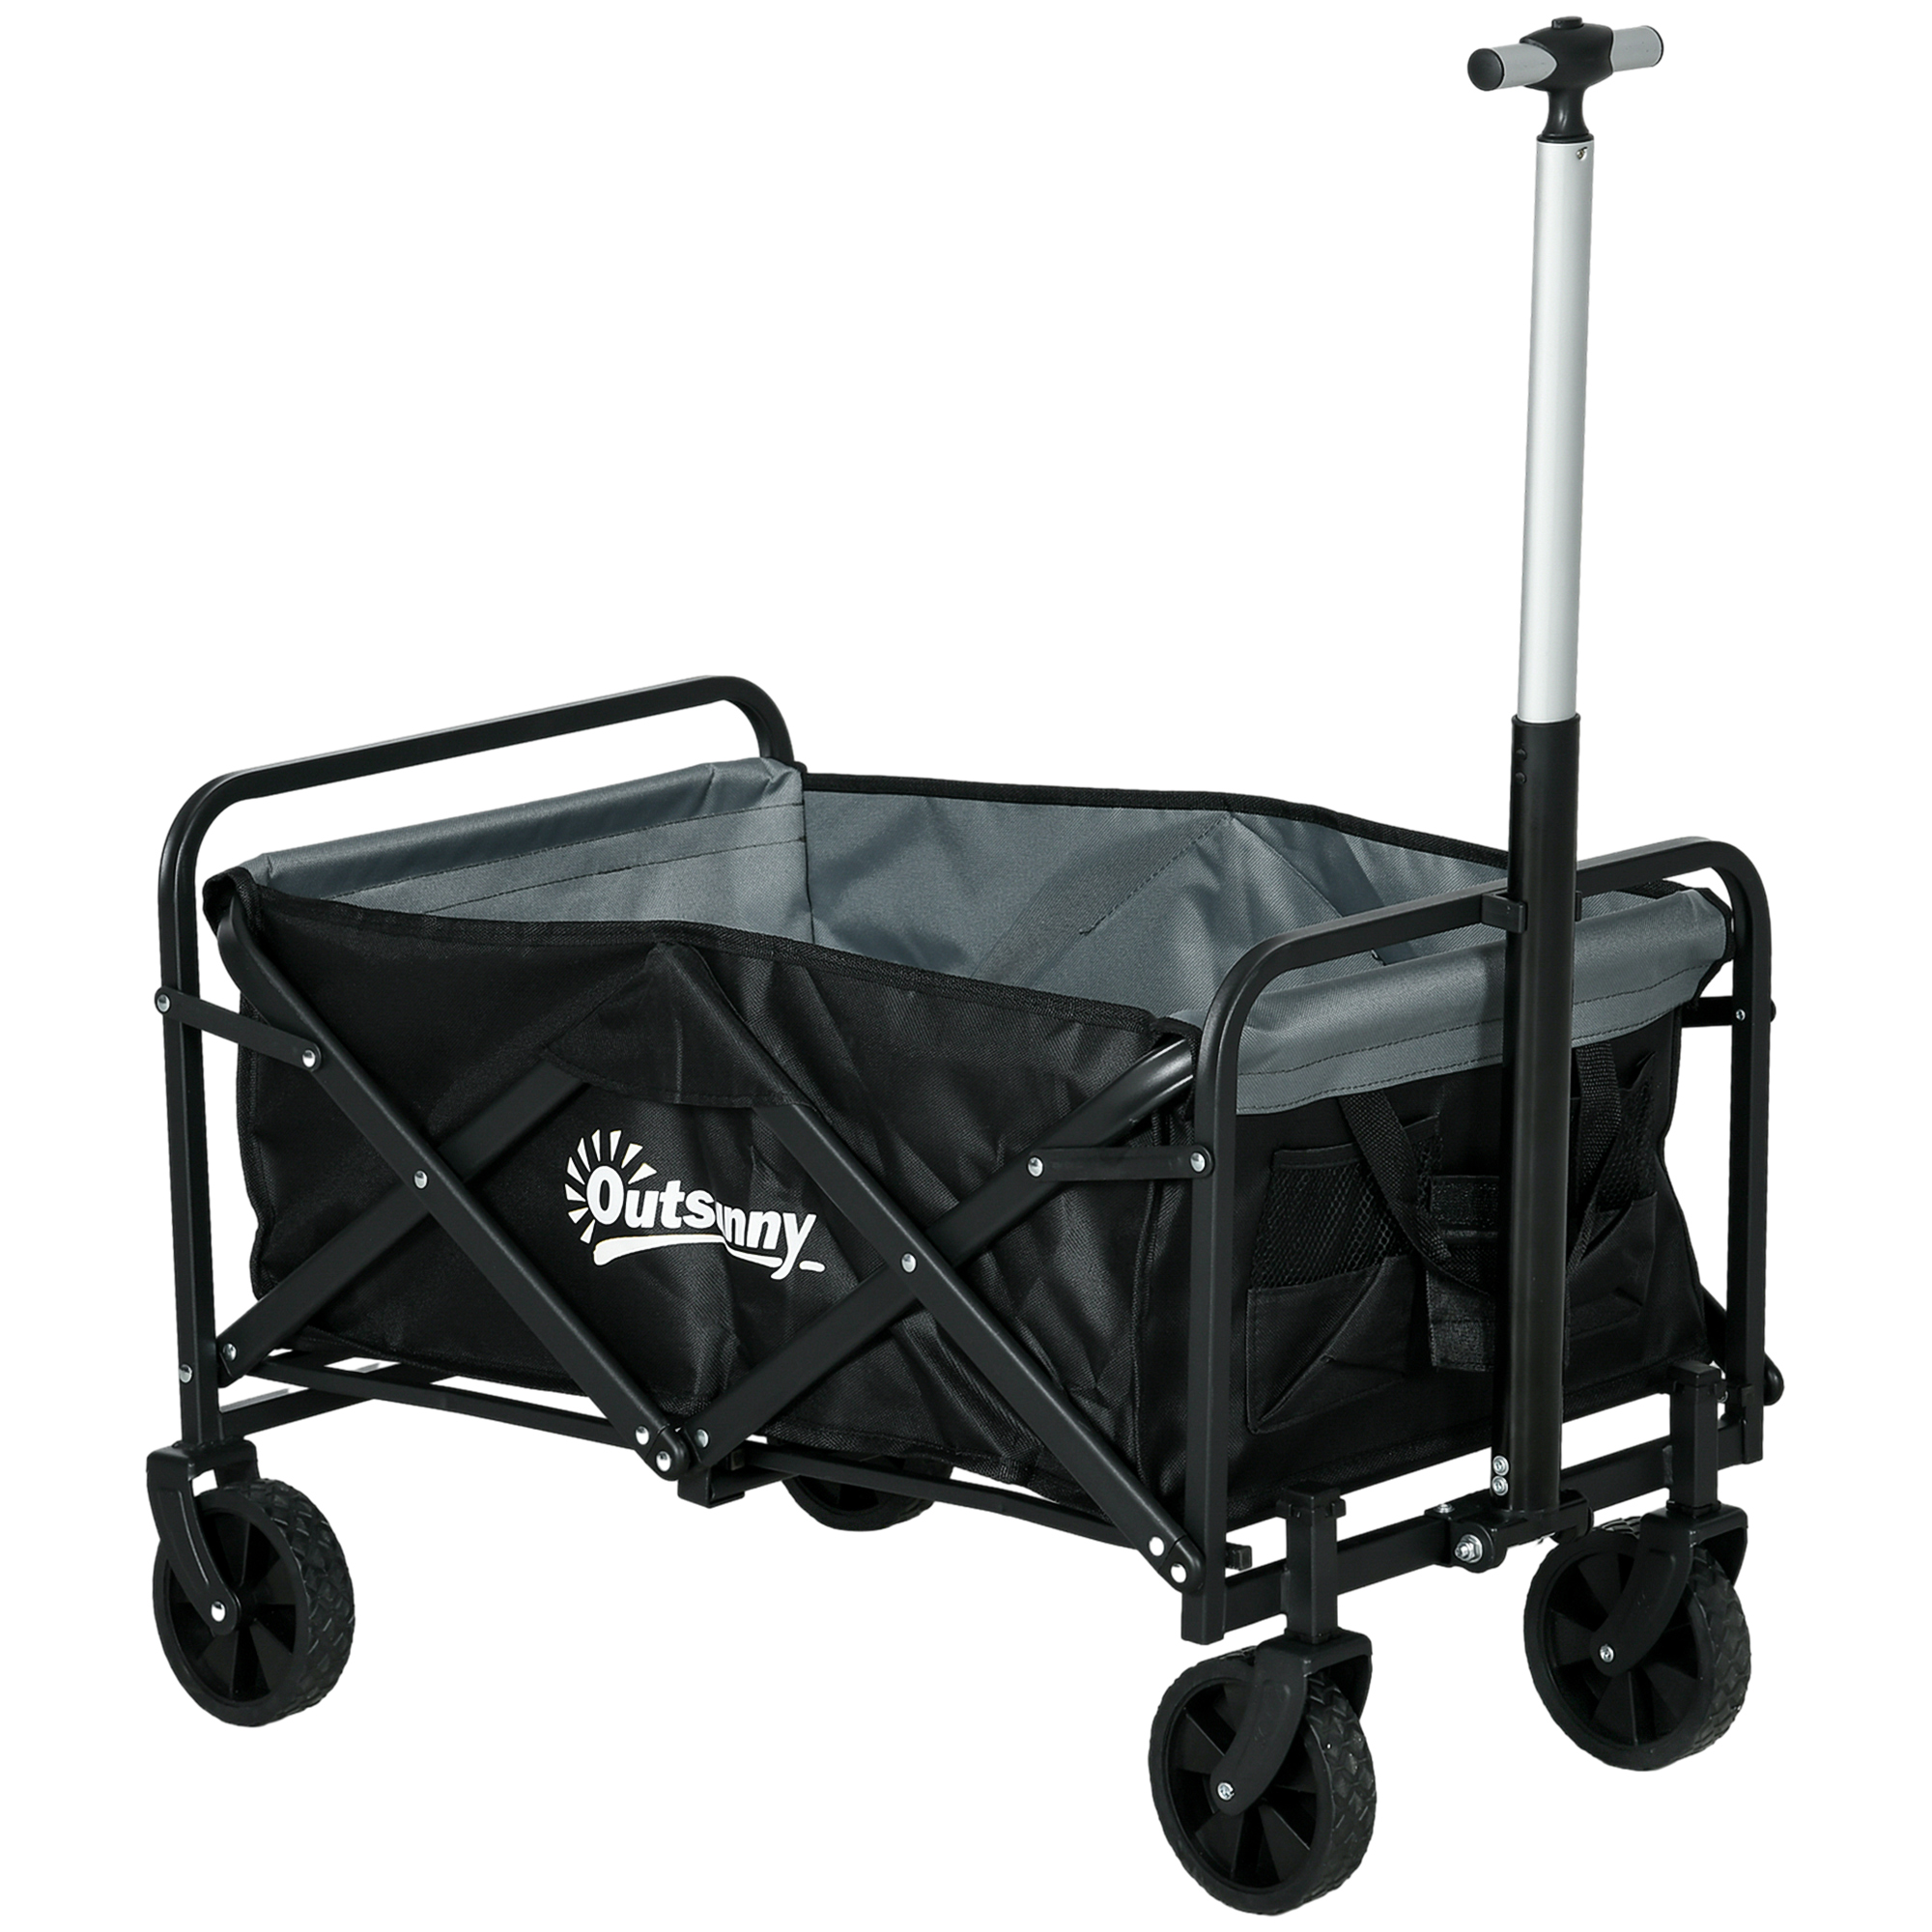 Collapsible Wagon Cart with Telescopic Handle